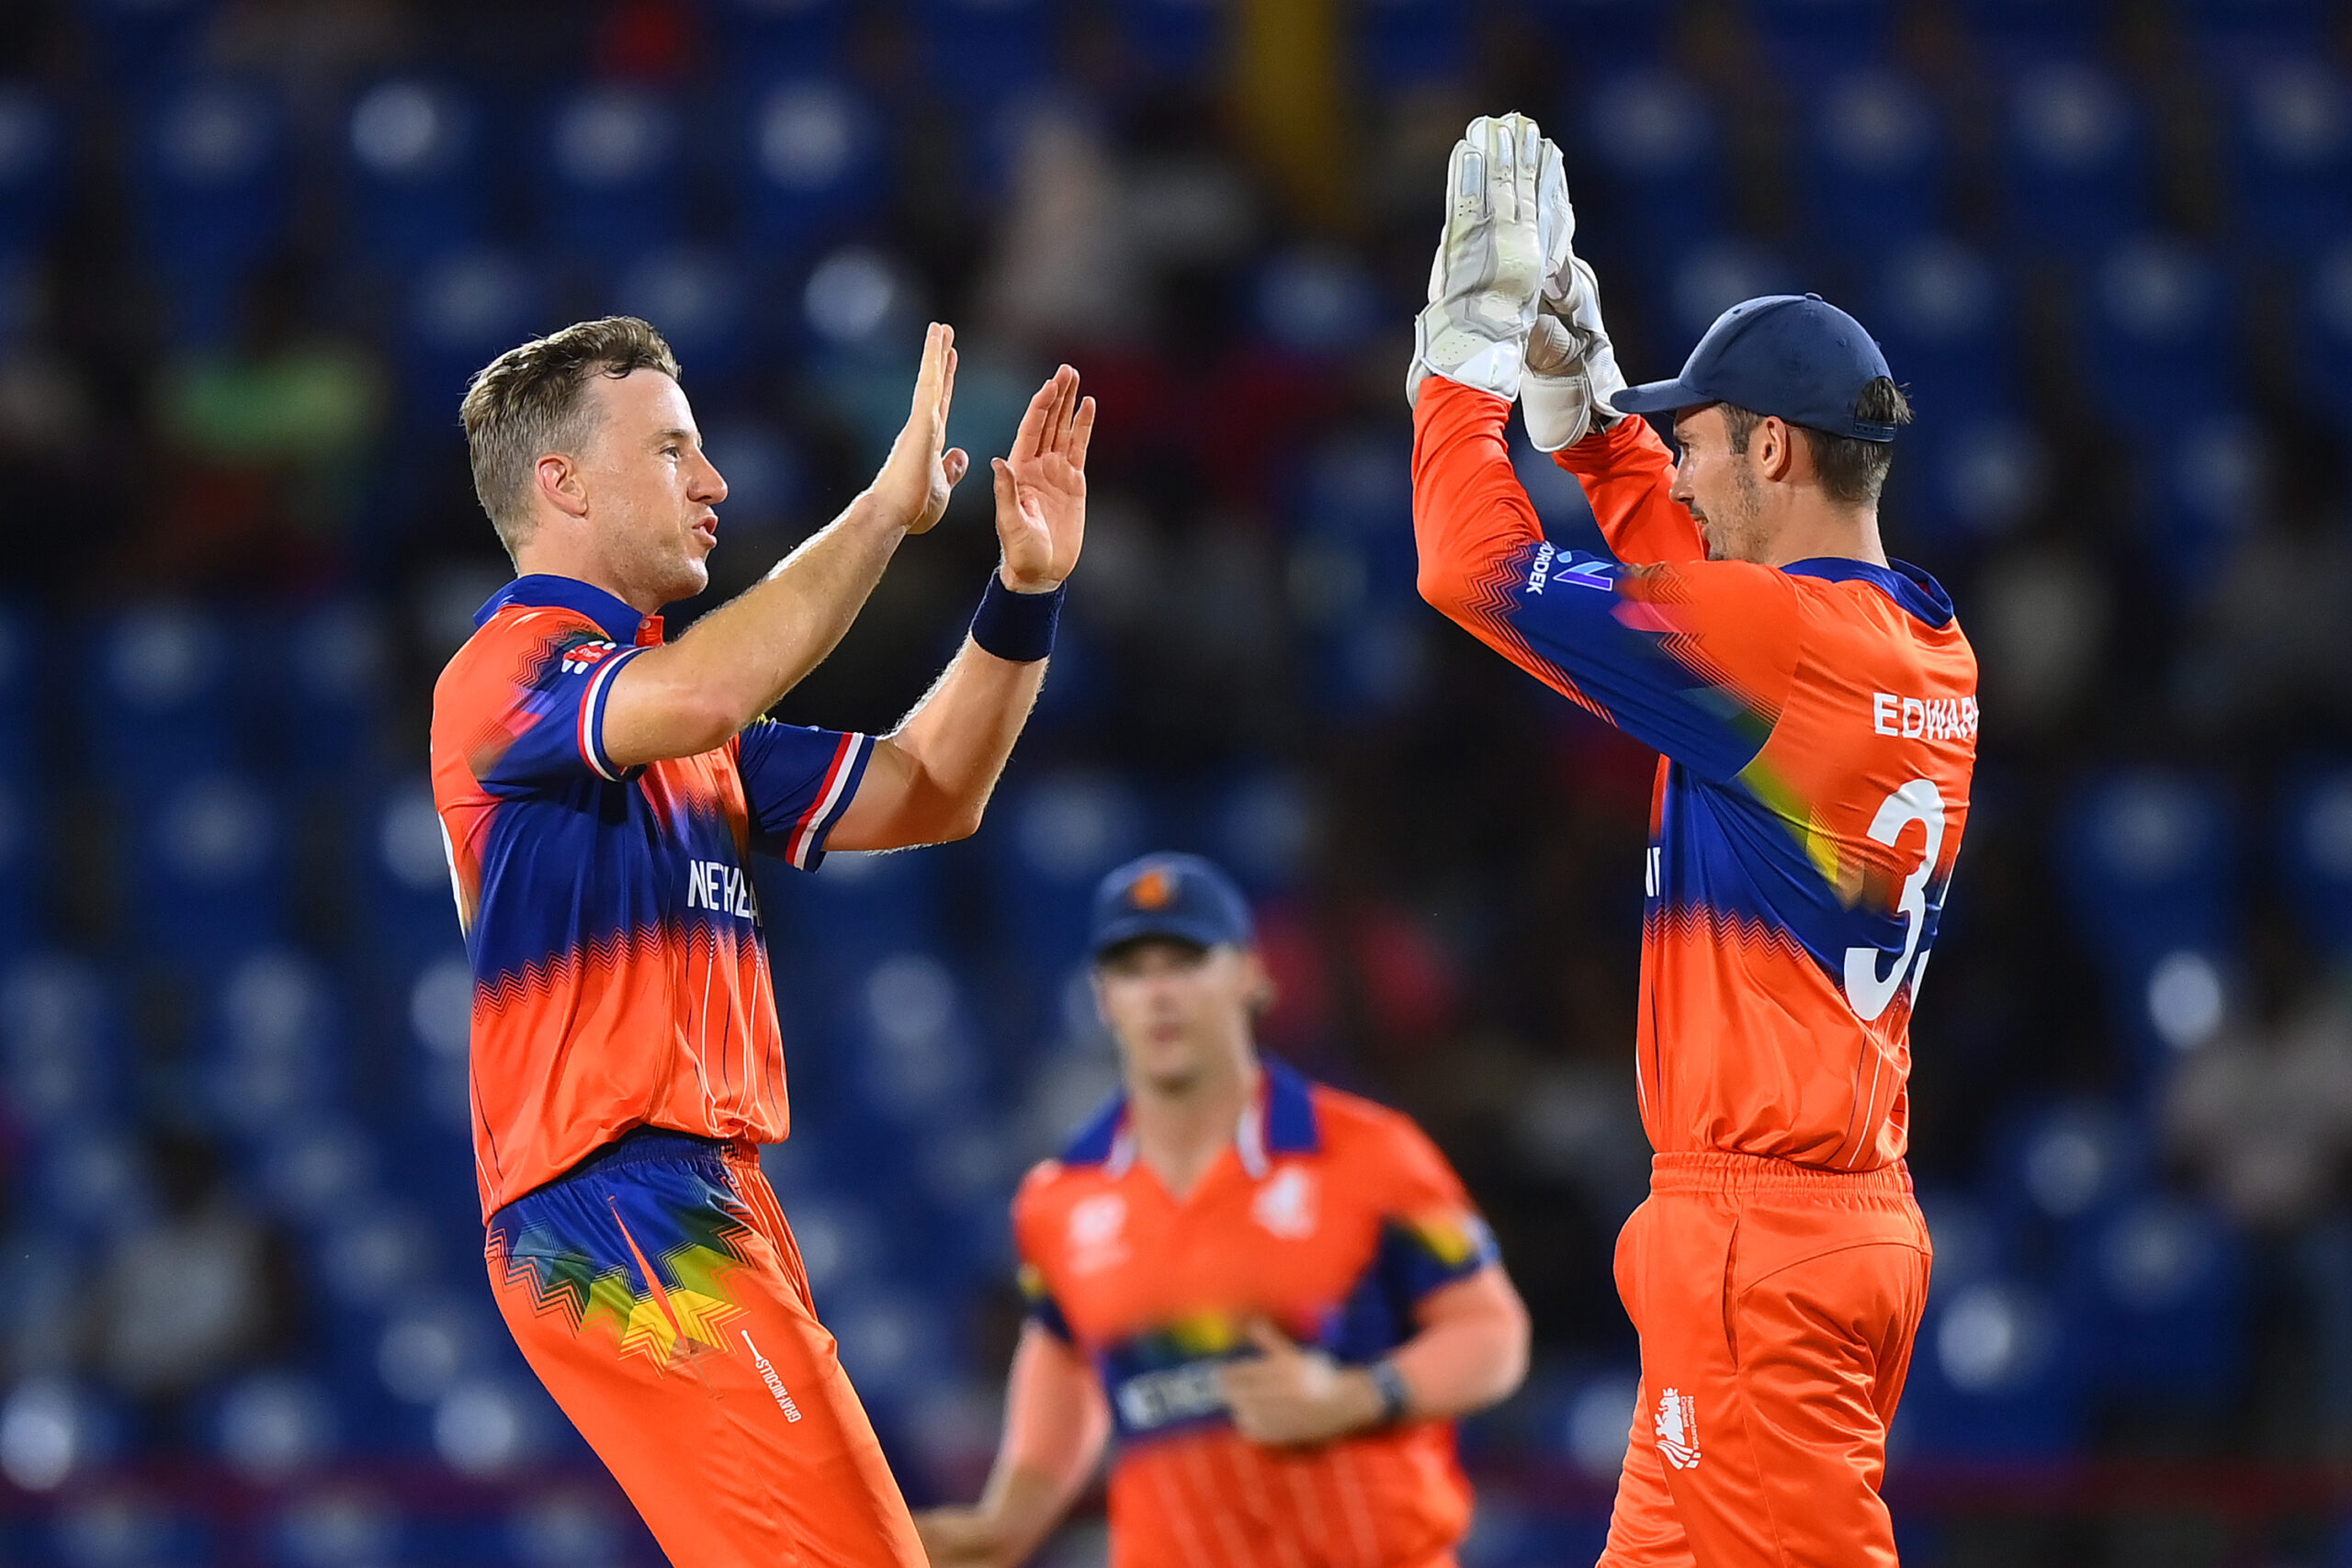 Dutch knocked out of the T20 World Cup, Bangladesh sneak through